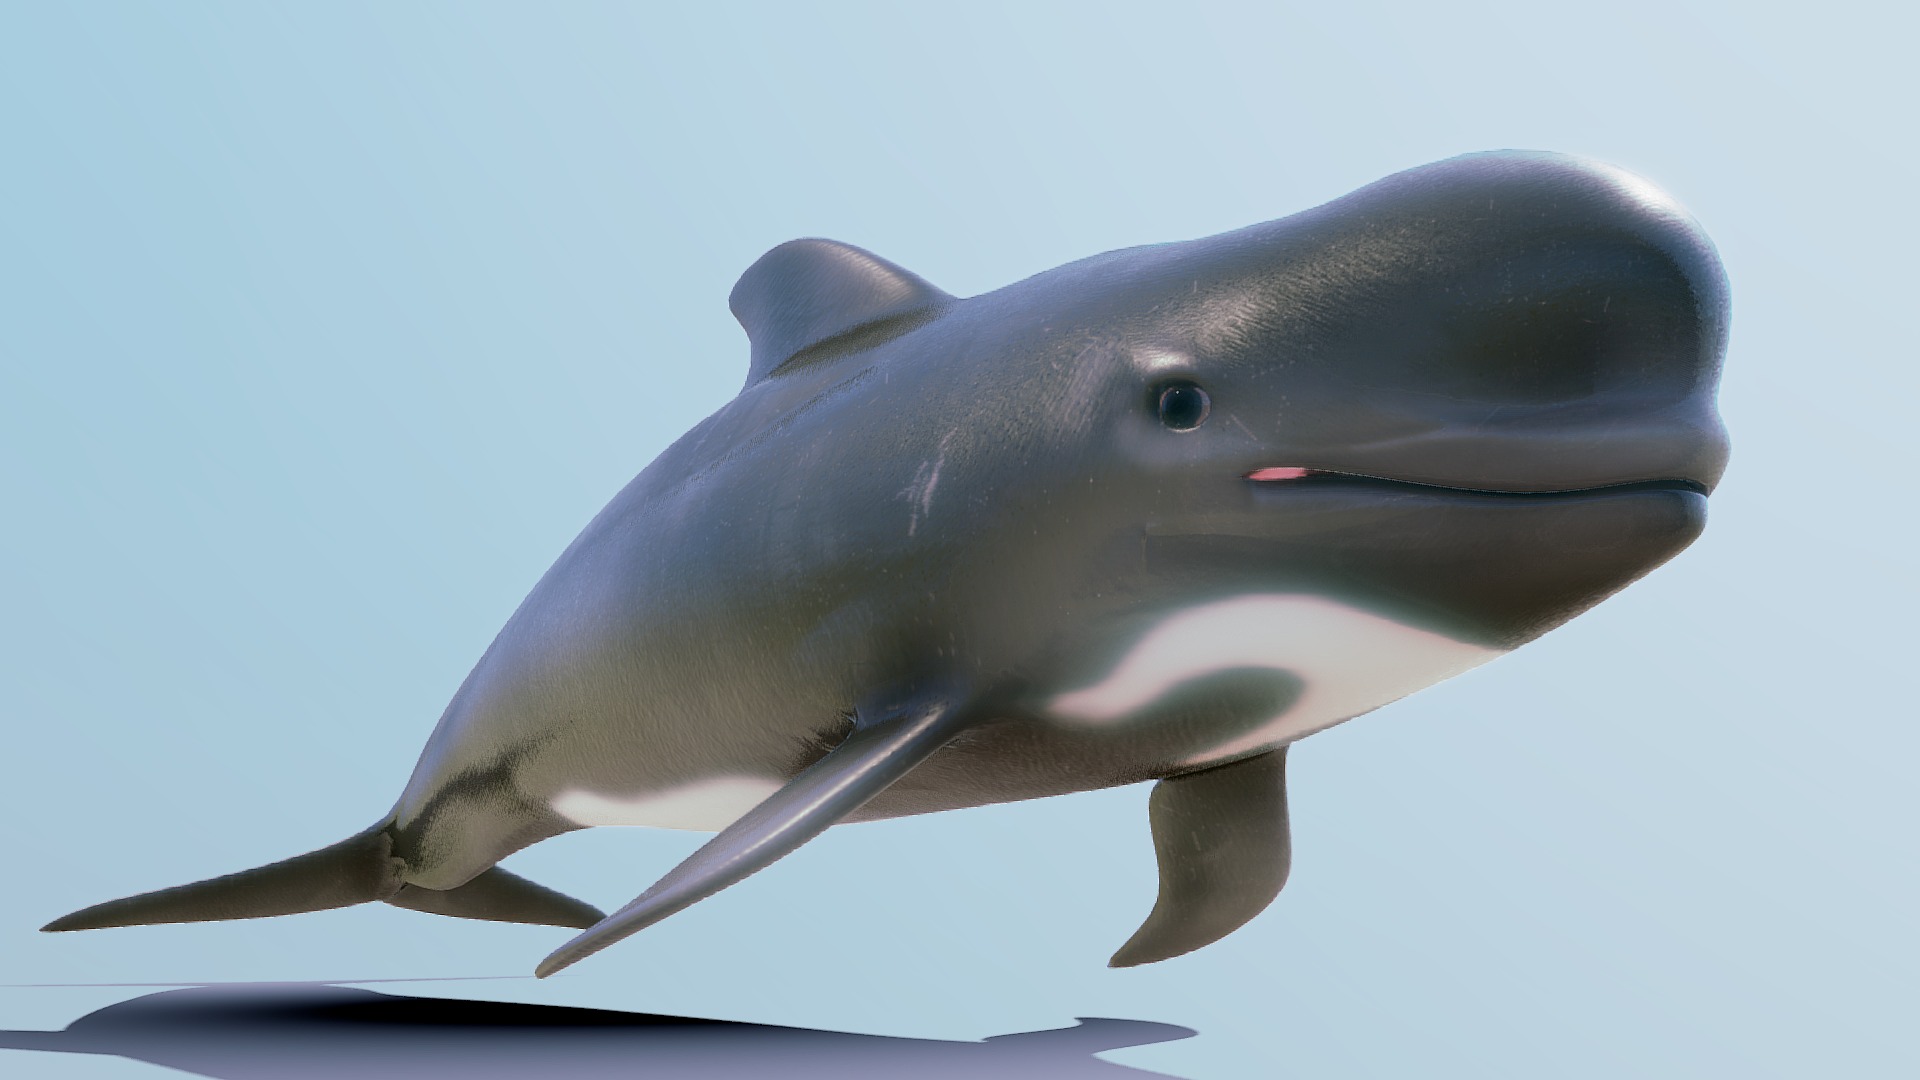 3D model Globicephala Melas - This is a 3D model of the Globicephala Melas. The 3D model is about a dolphin jumping out of the water.